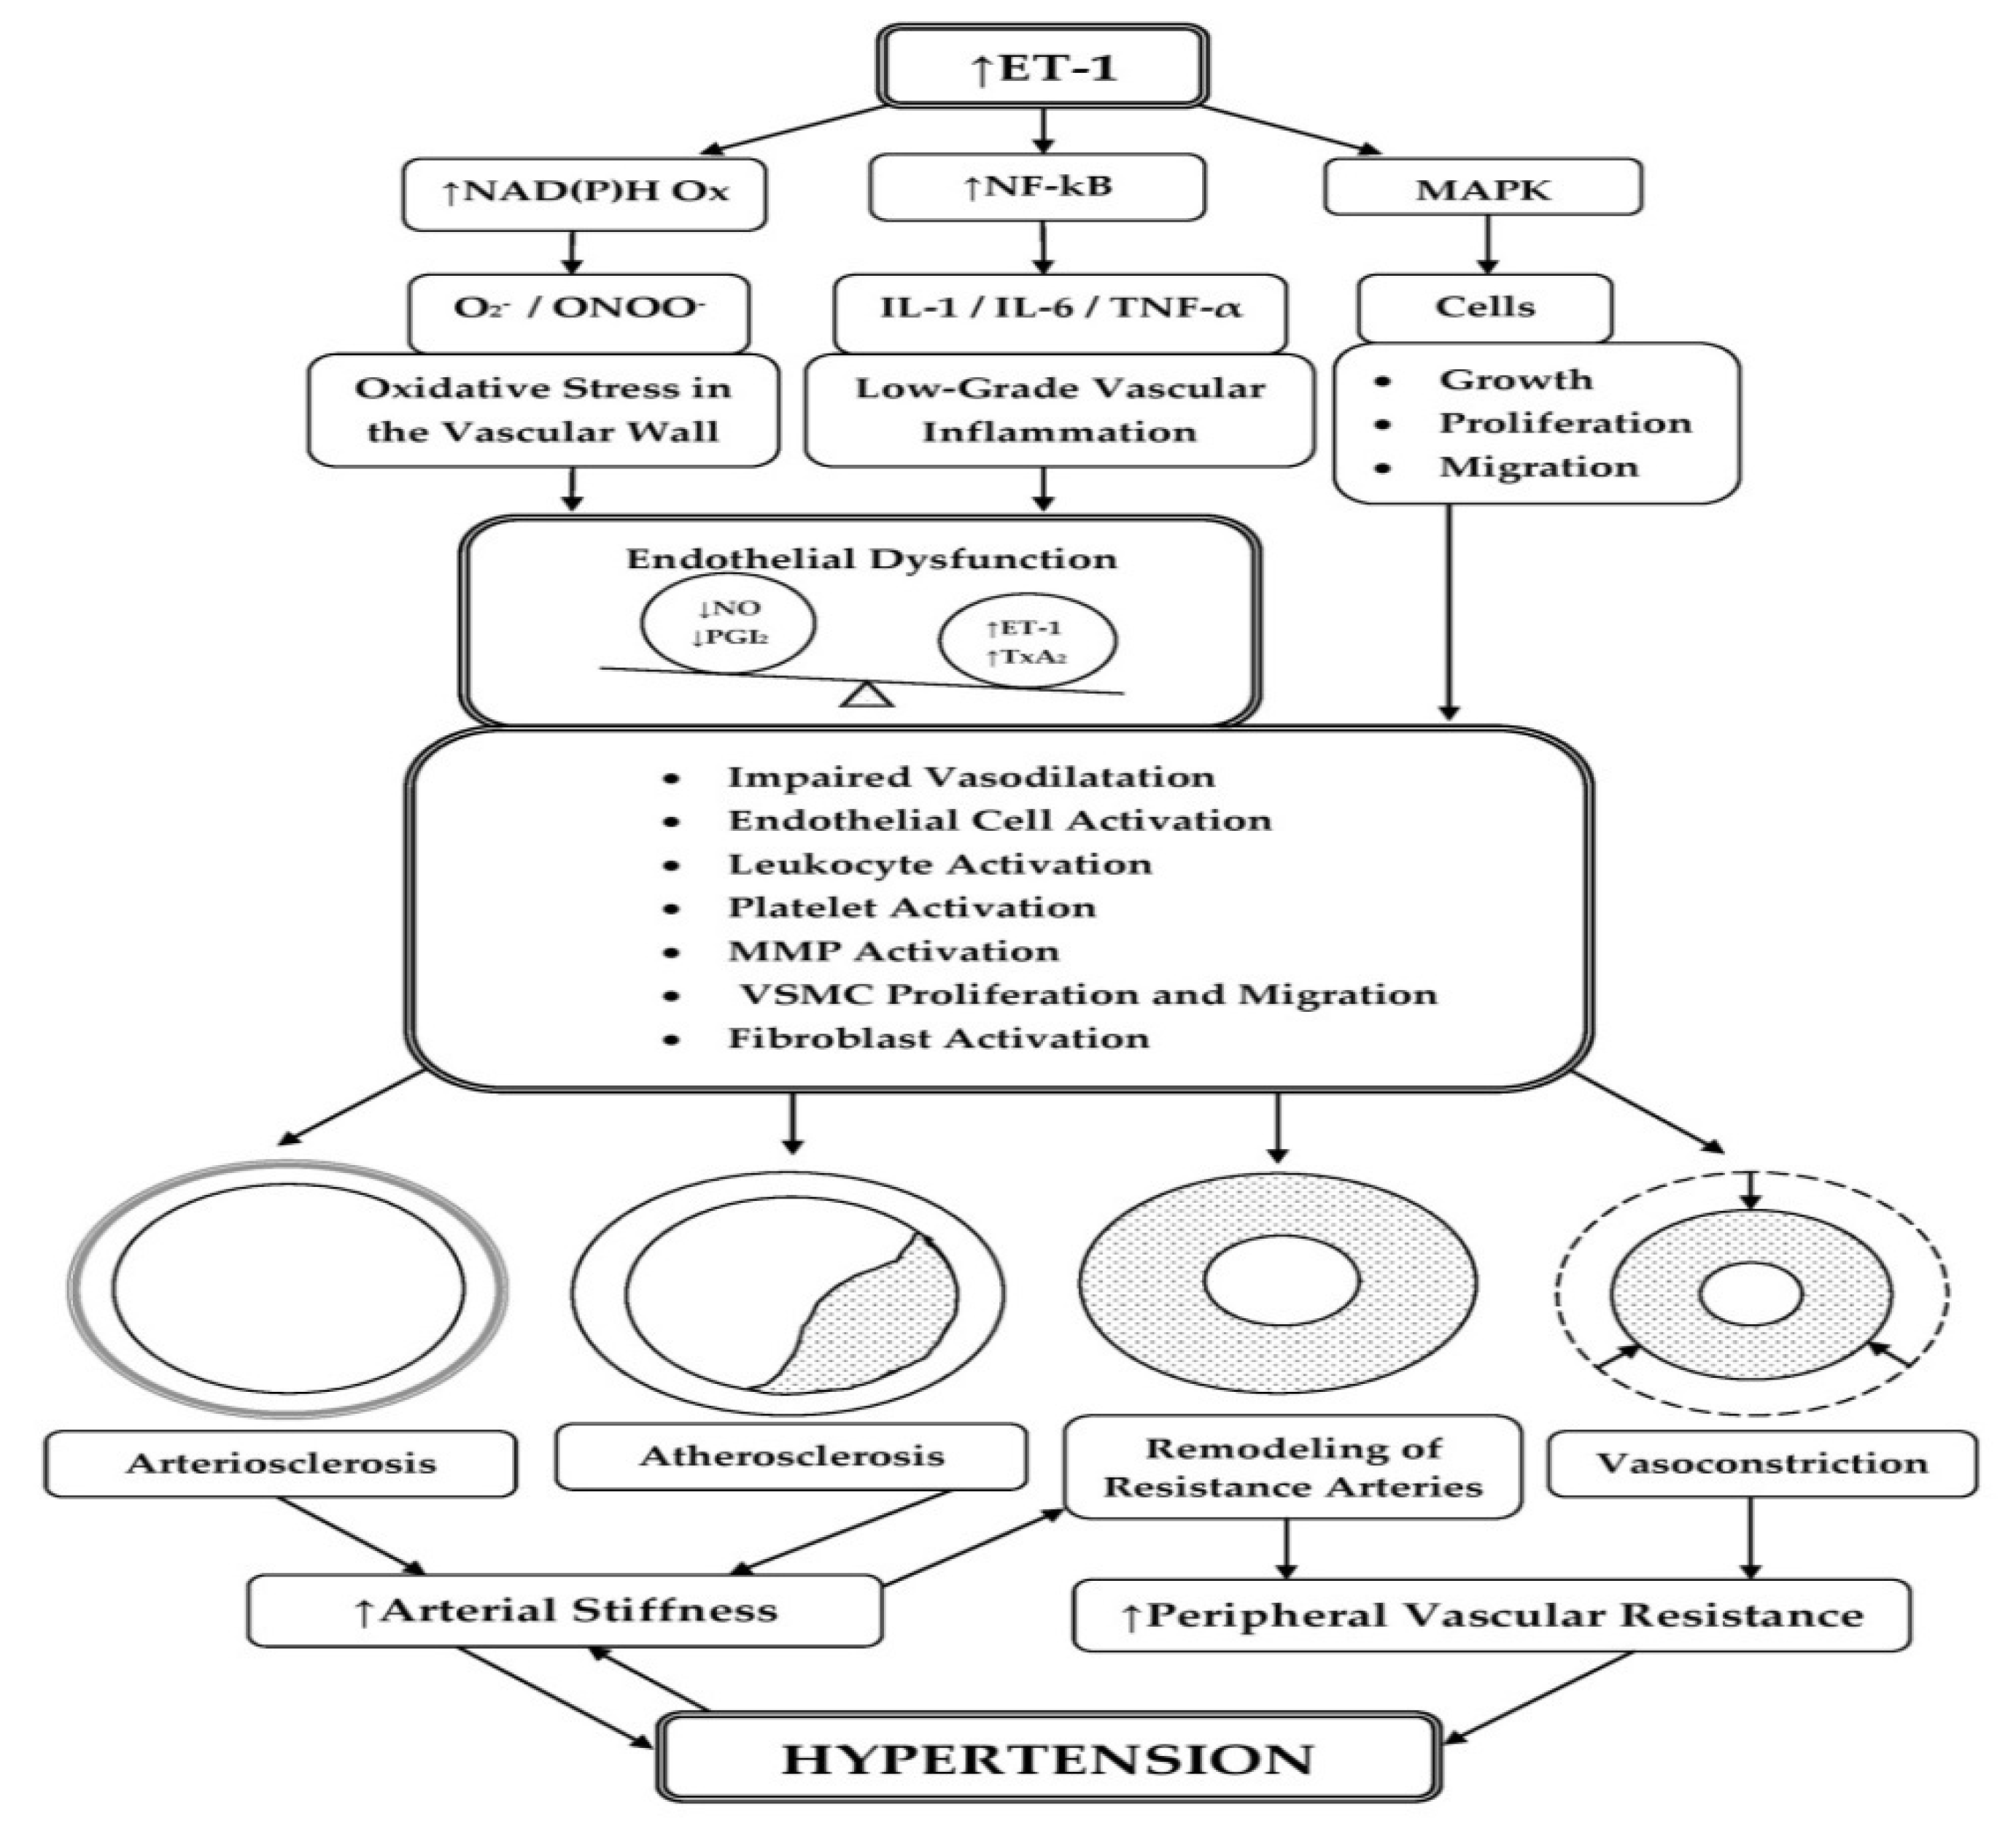 Life | Free Full-Text | The Causal Relationship between Endothelin-1 and Hypertension: Focusing on Endothelial Dysfunction, Arterial Vascular Blood Pressure Regulation | HTML